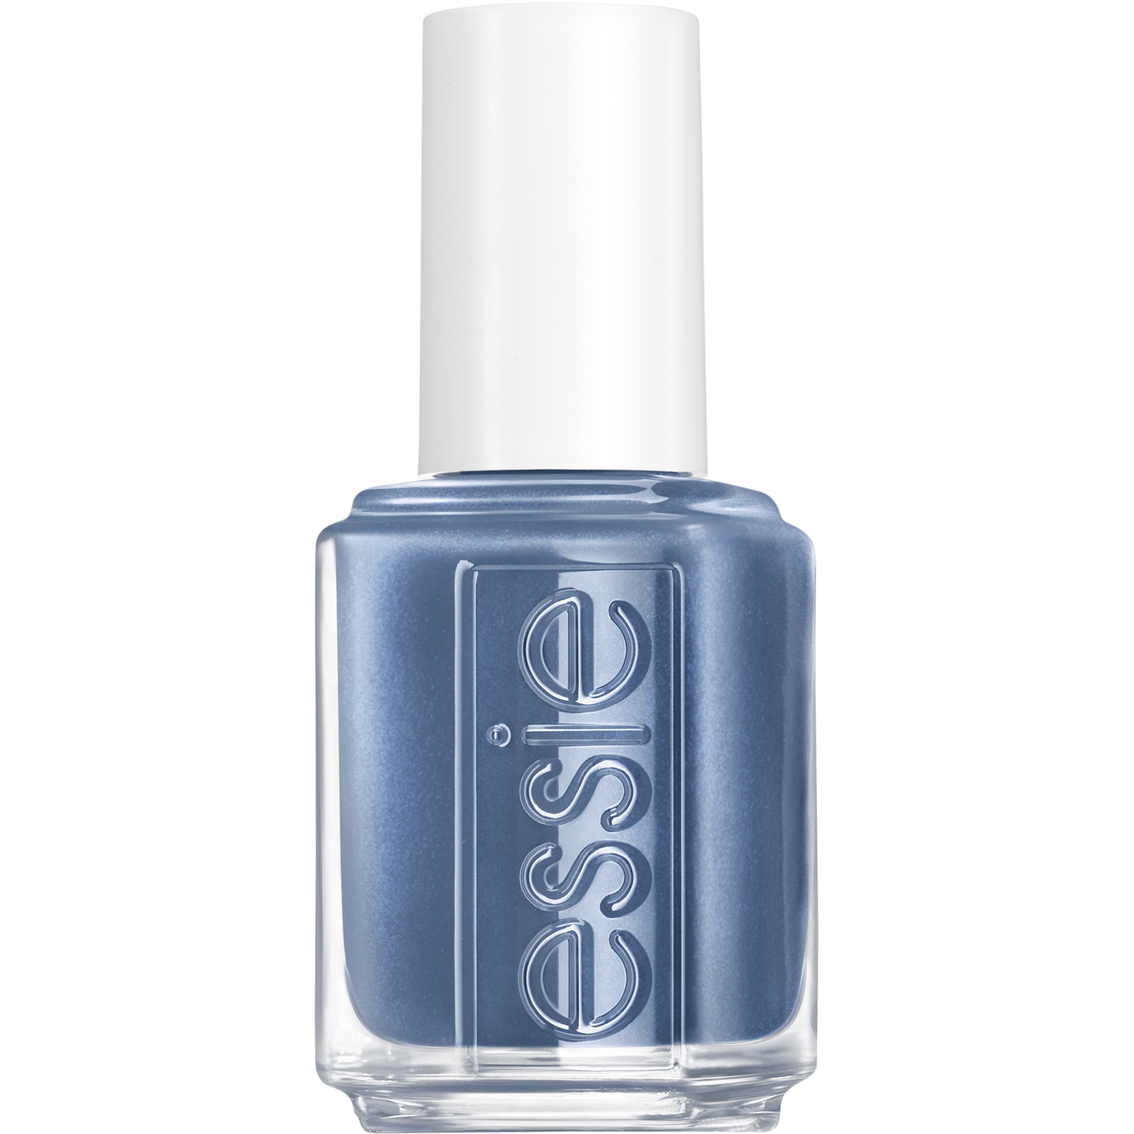 Essie Nail Polish From A To Zzz - Image 2 of 8